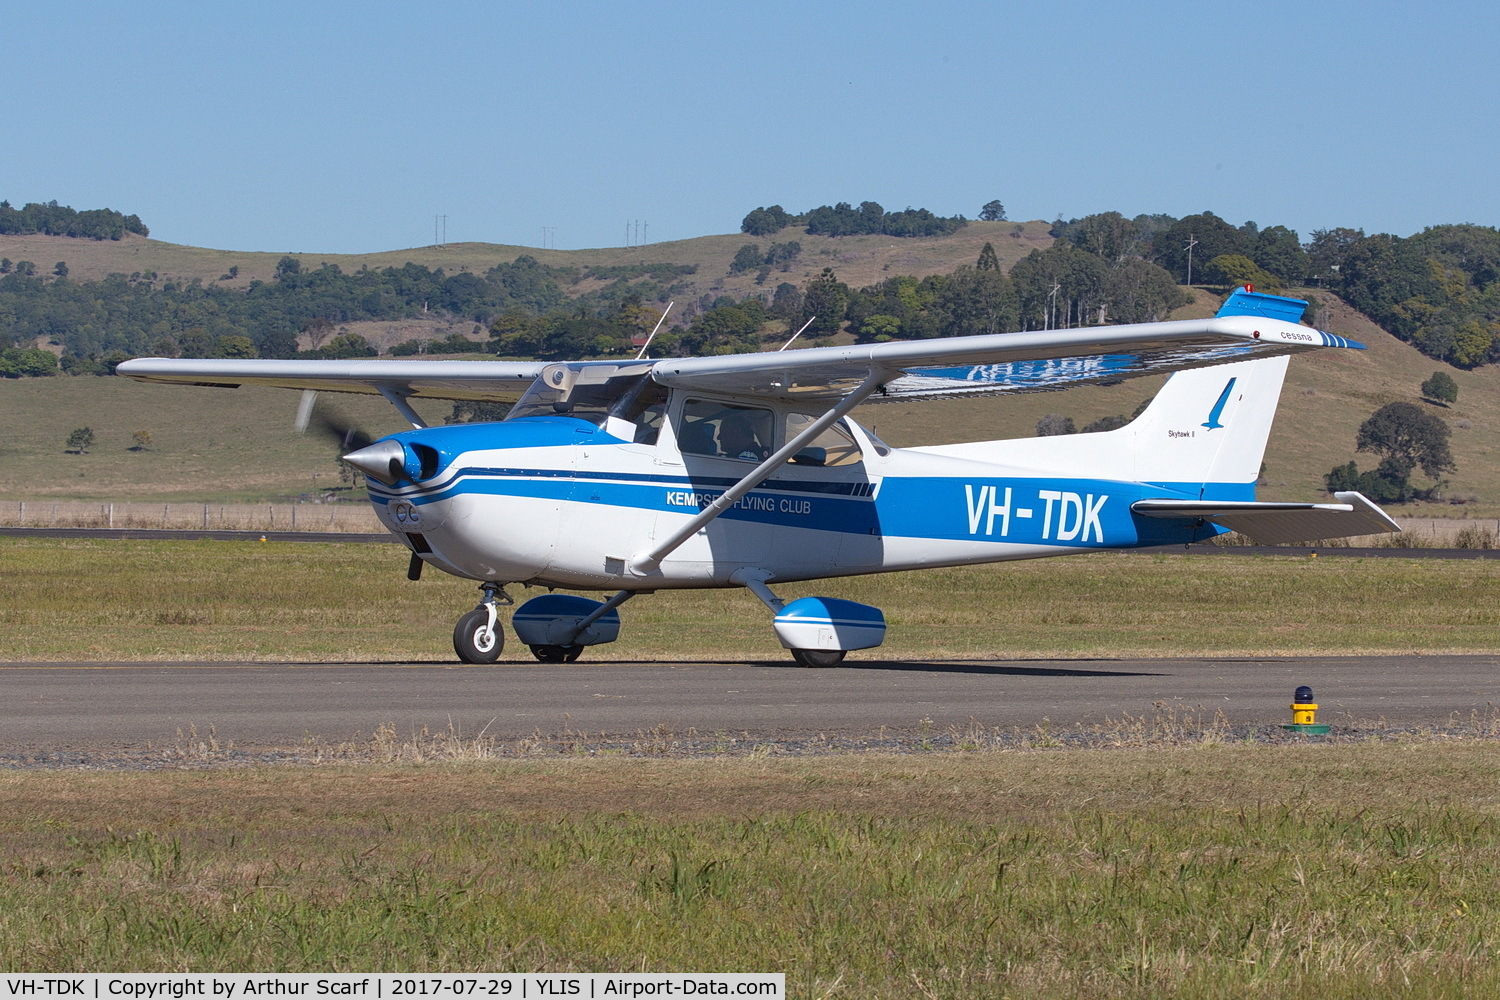 VH-TDK, 1975 Cessna 172M C/N 17265104, Lismore NSW Aviation Expo 2017